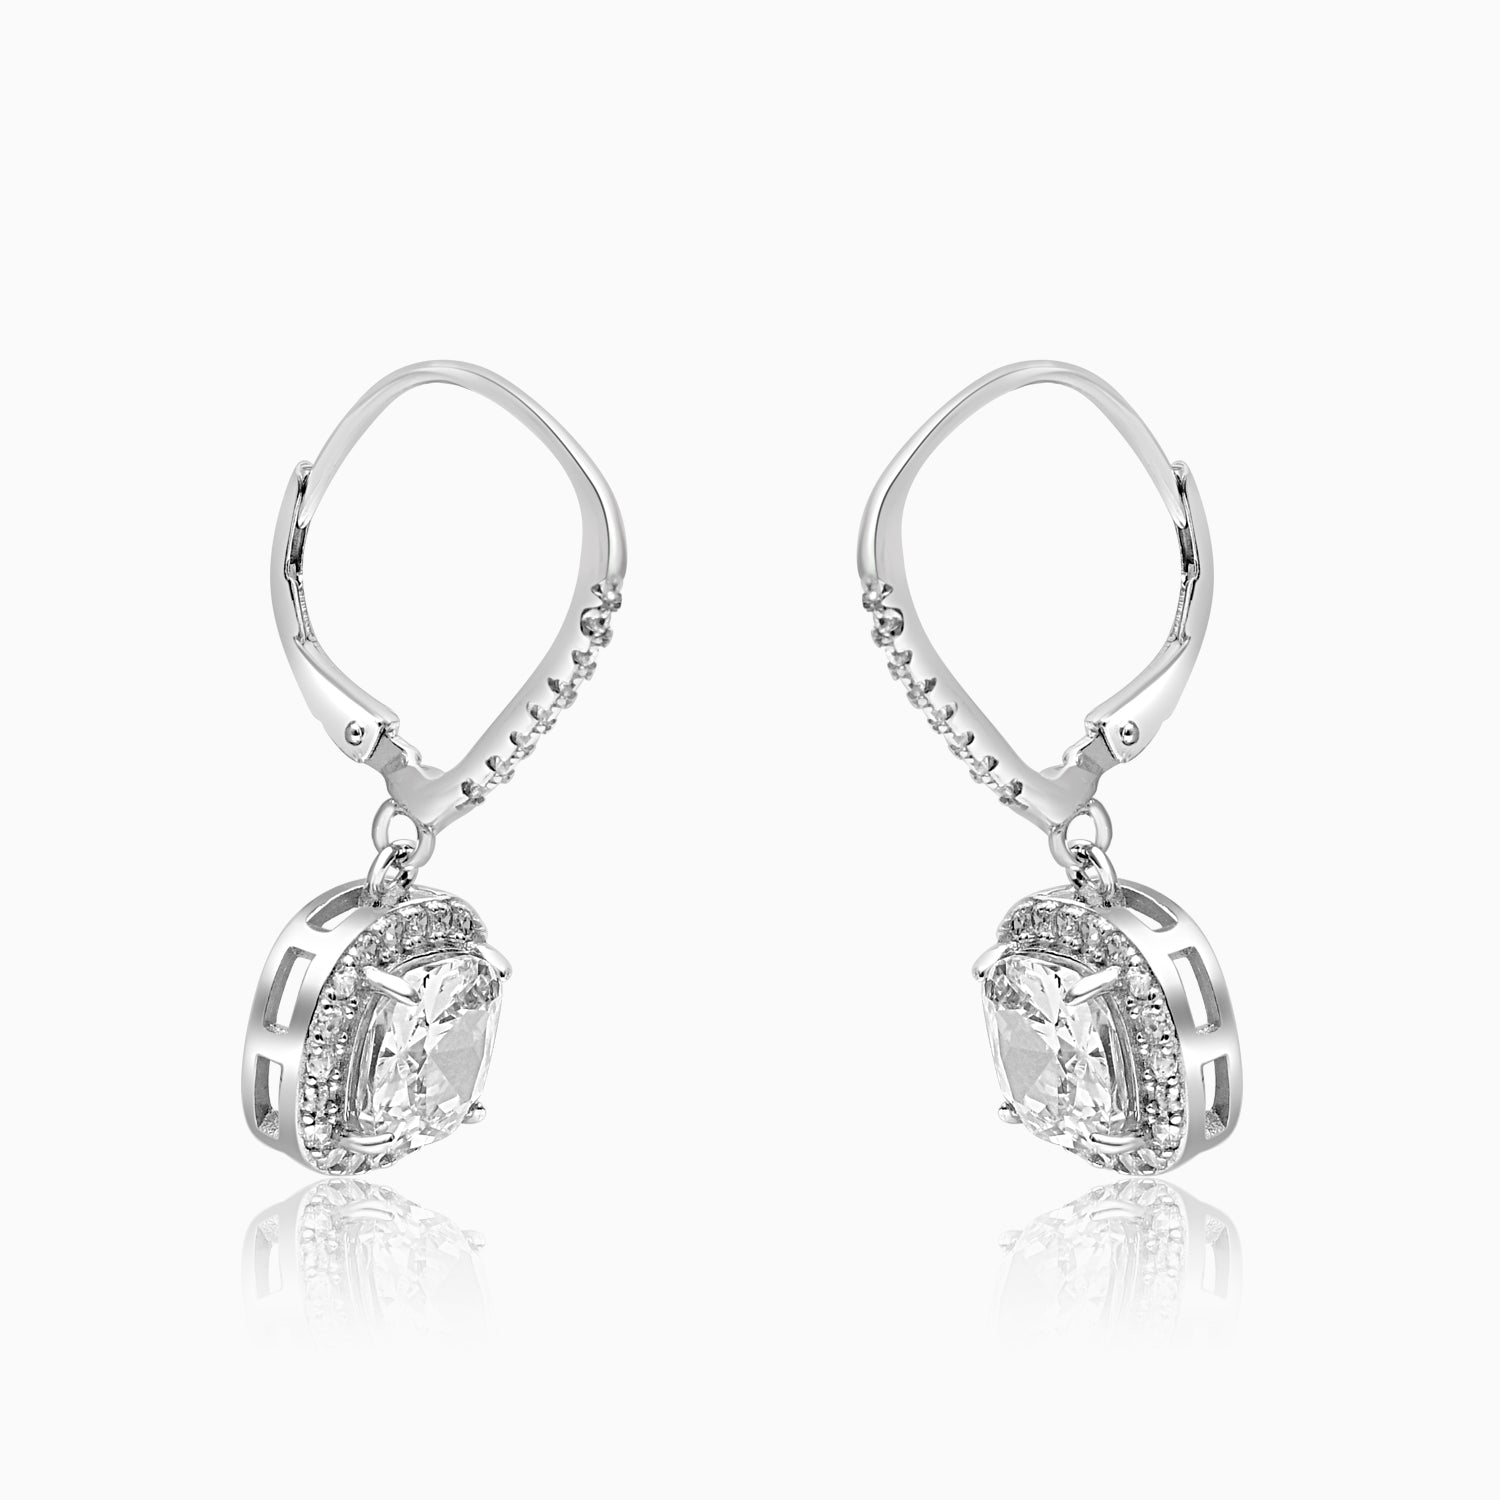 Silver Dangling Grand Solitaire Earrings